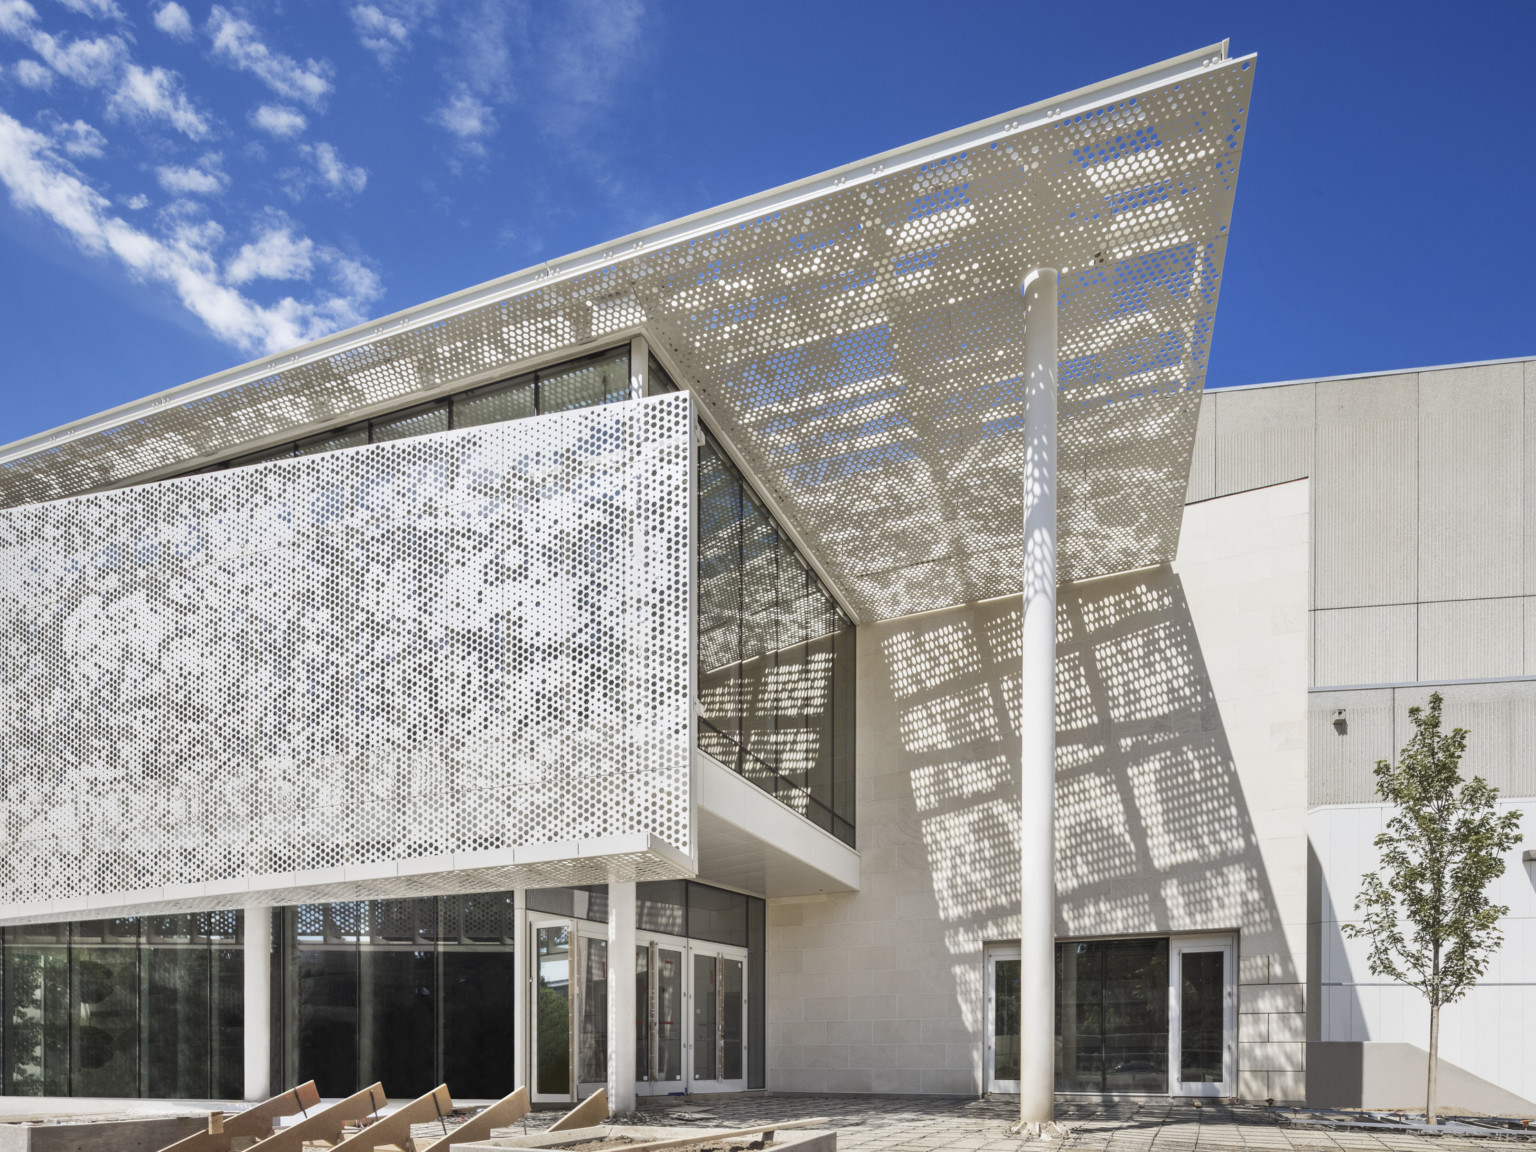 Organic design in translucent awning provides shade and shadow design in the entry of light colored building